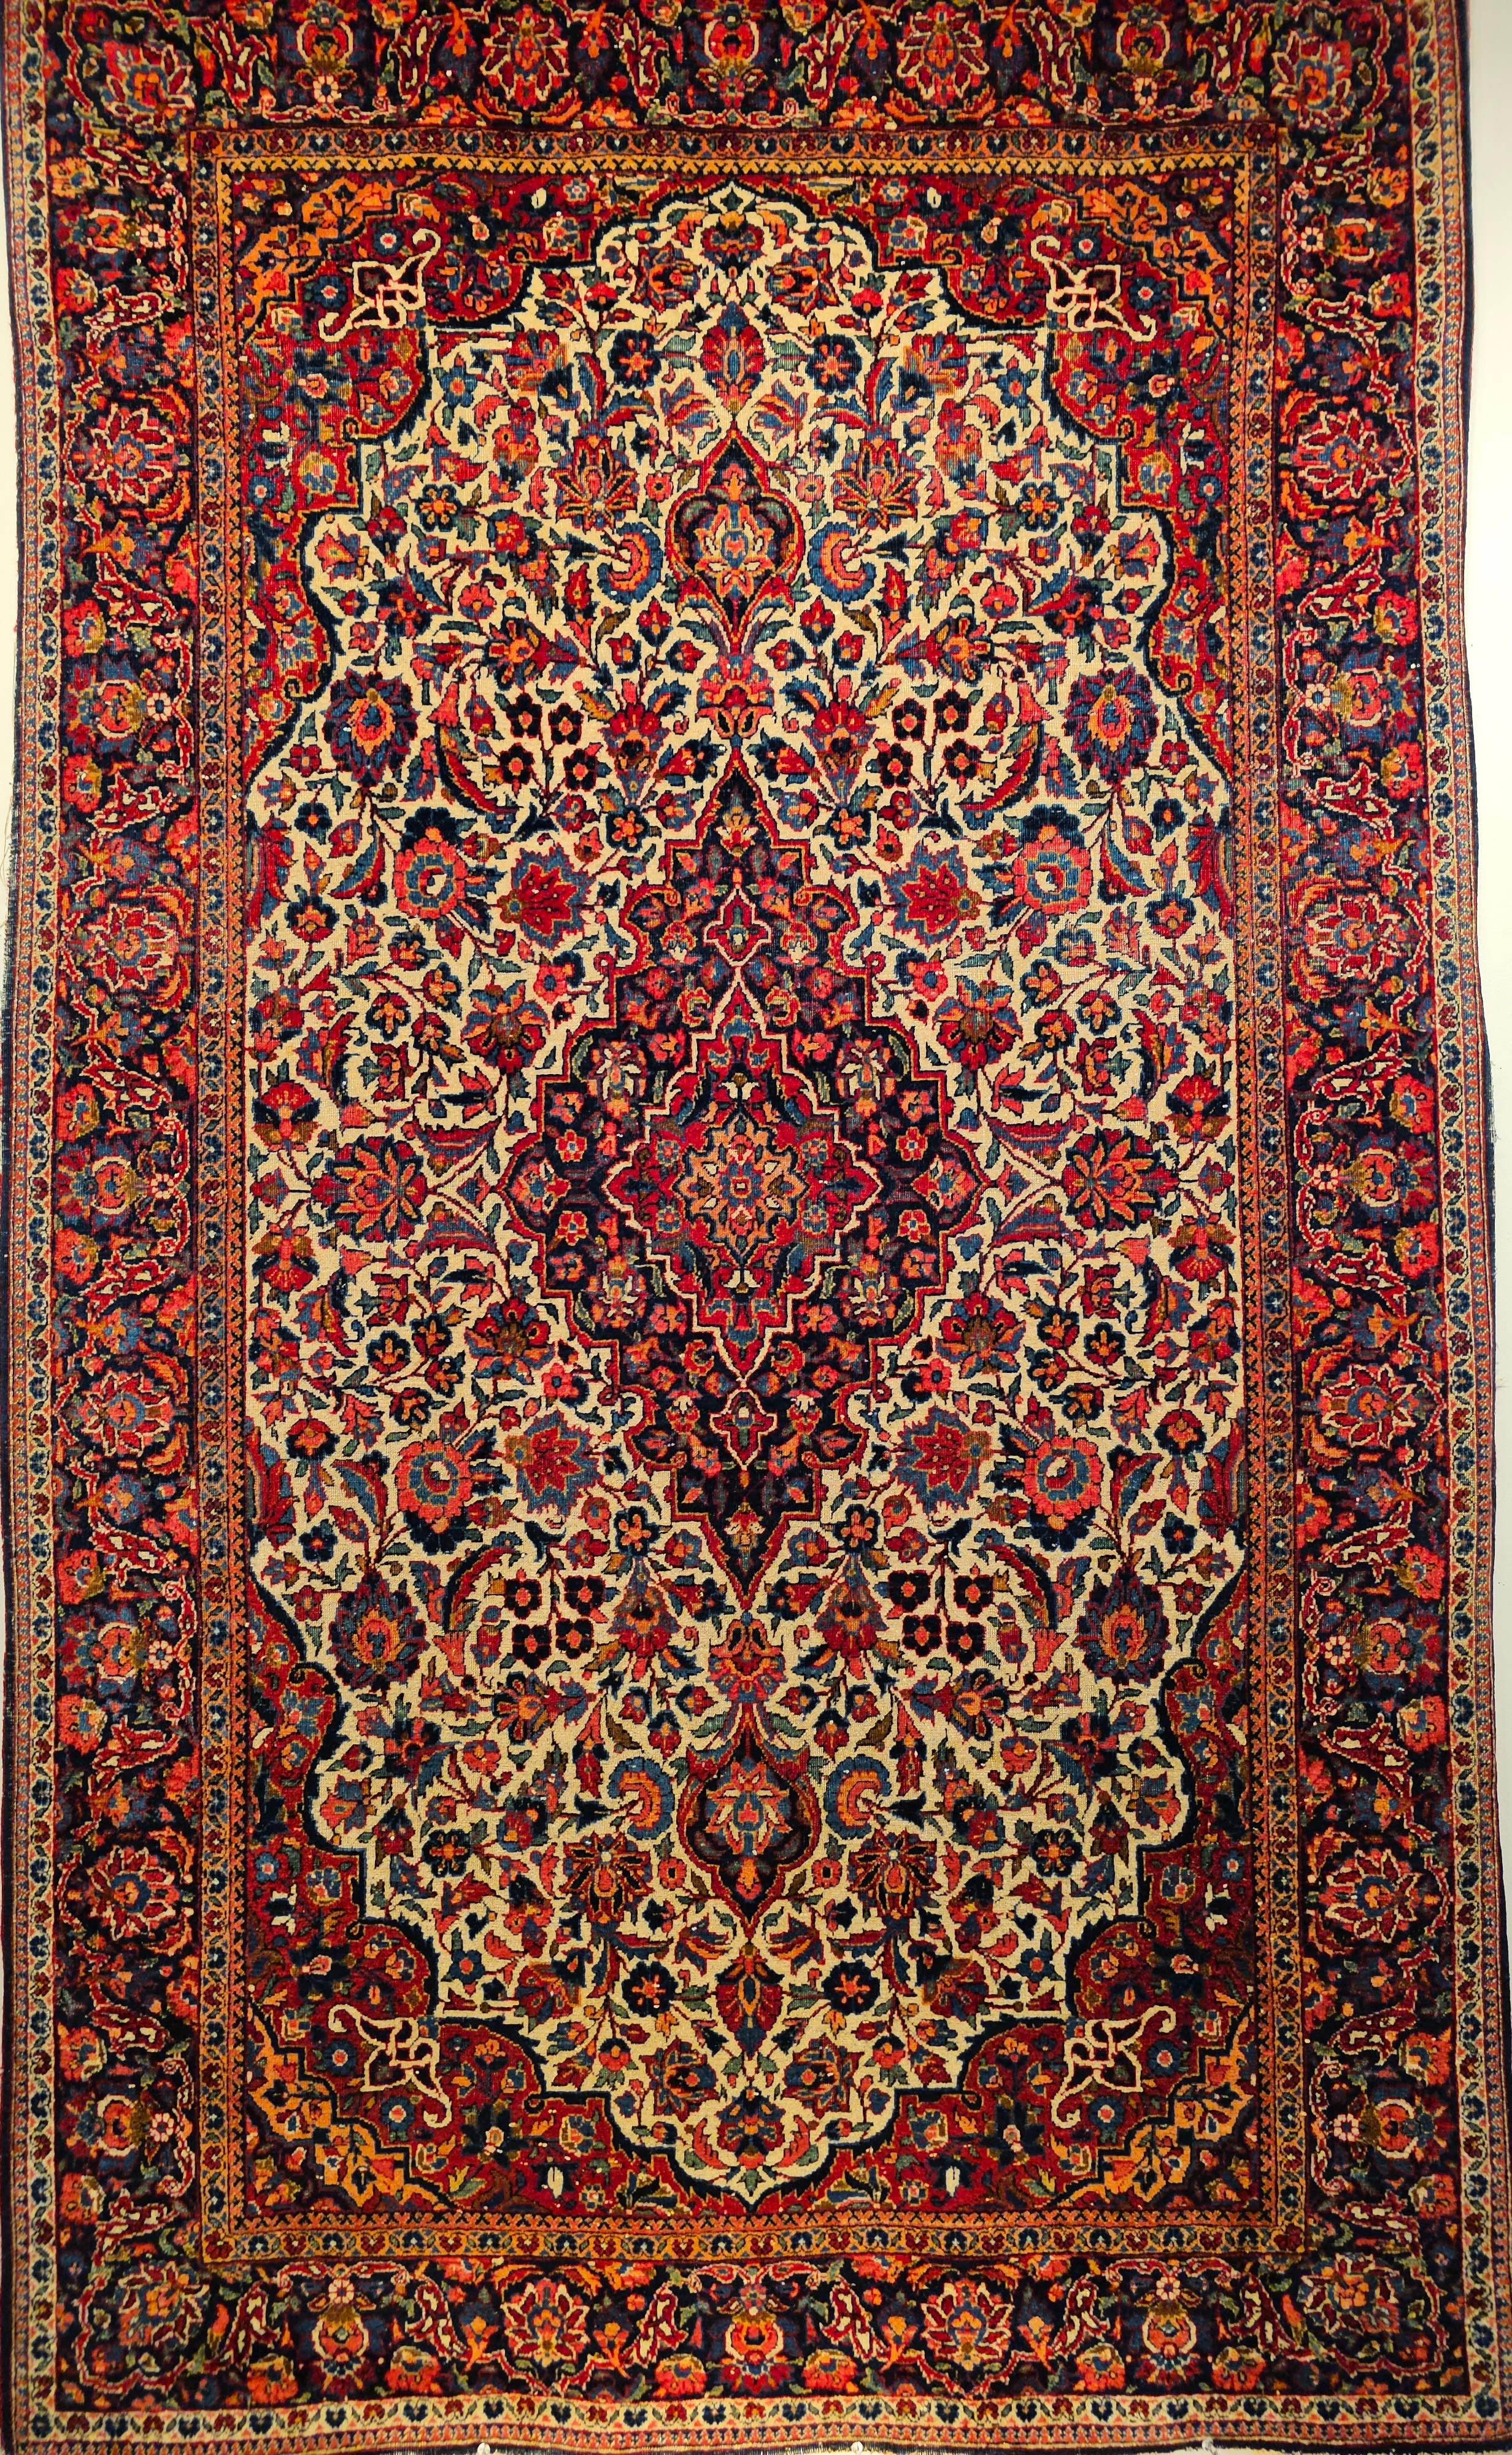 An early 1900s hand-woven persian Kashan floral design area rug in a rare ivory color background.   The classical design and luminous, resilient wool quality of this outstanding vintage Persian Kashan carpet create an impression of consummate